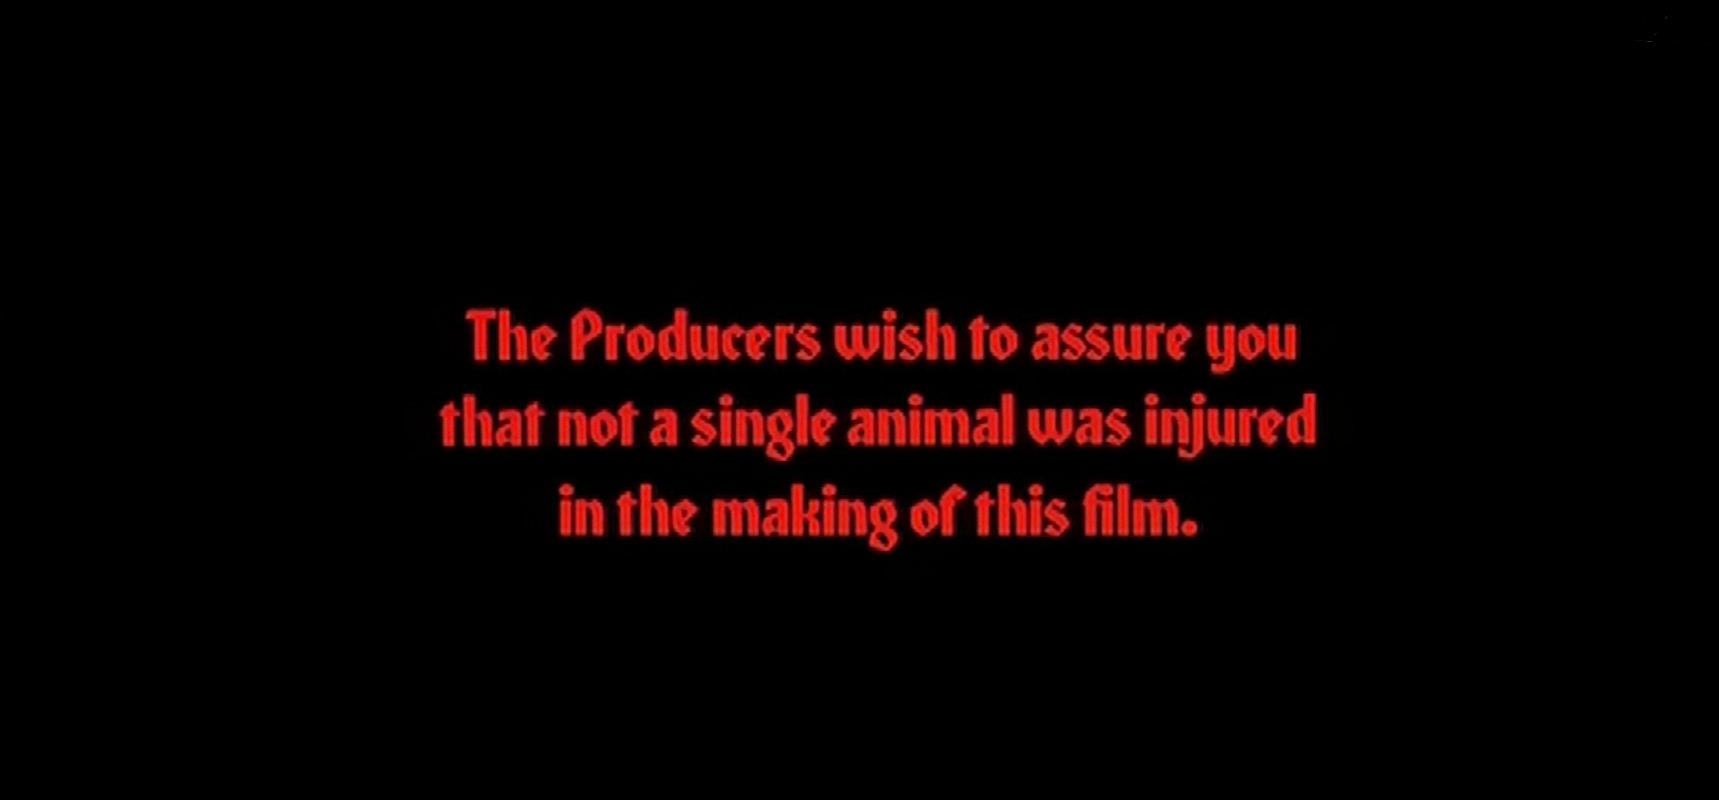 Main title from Shout at the Devil (1976) (2). The Producers wish to assure you that not a single animal was injured in the making of this film